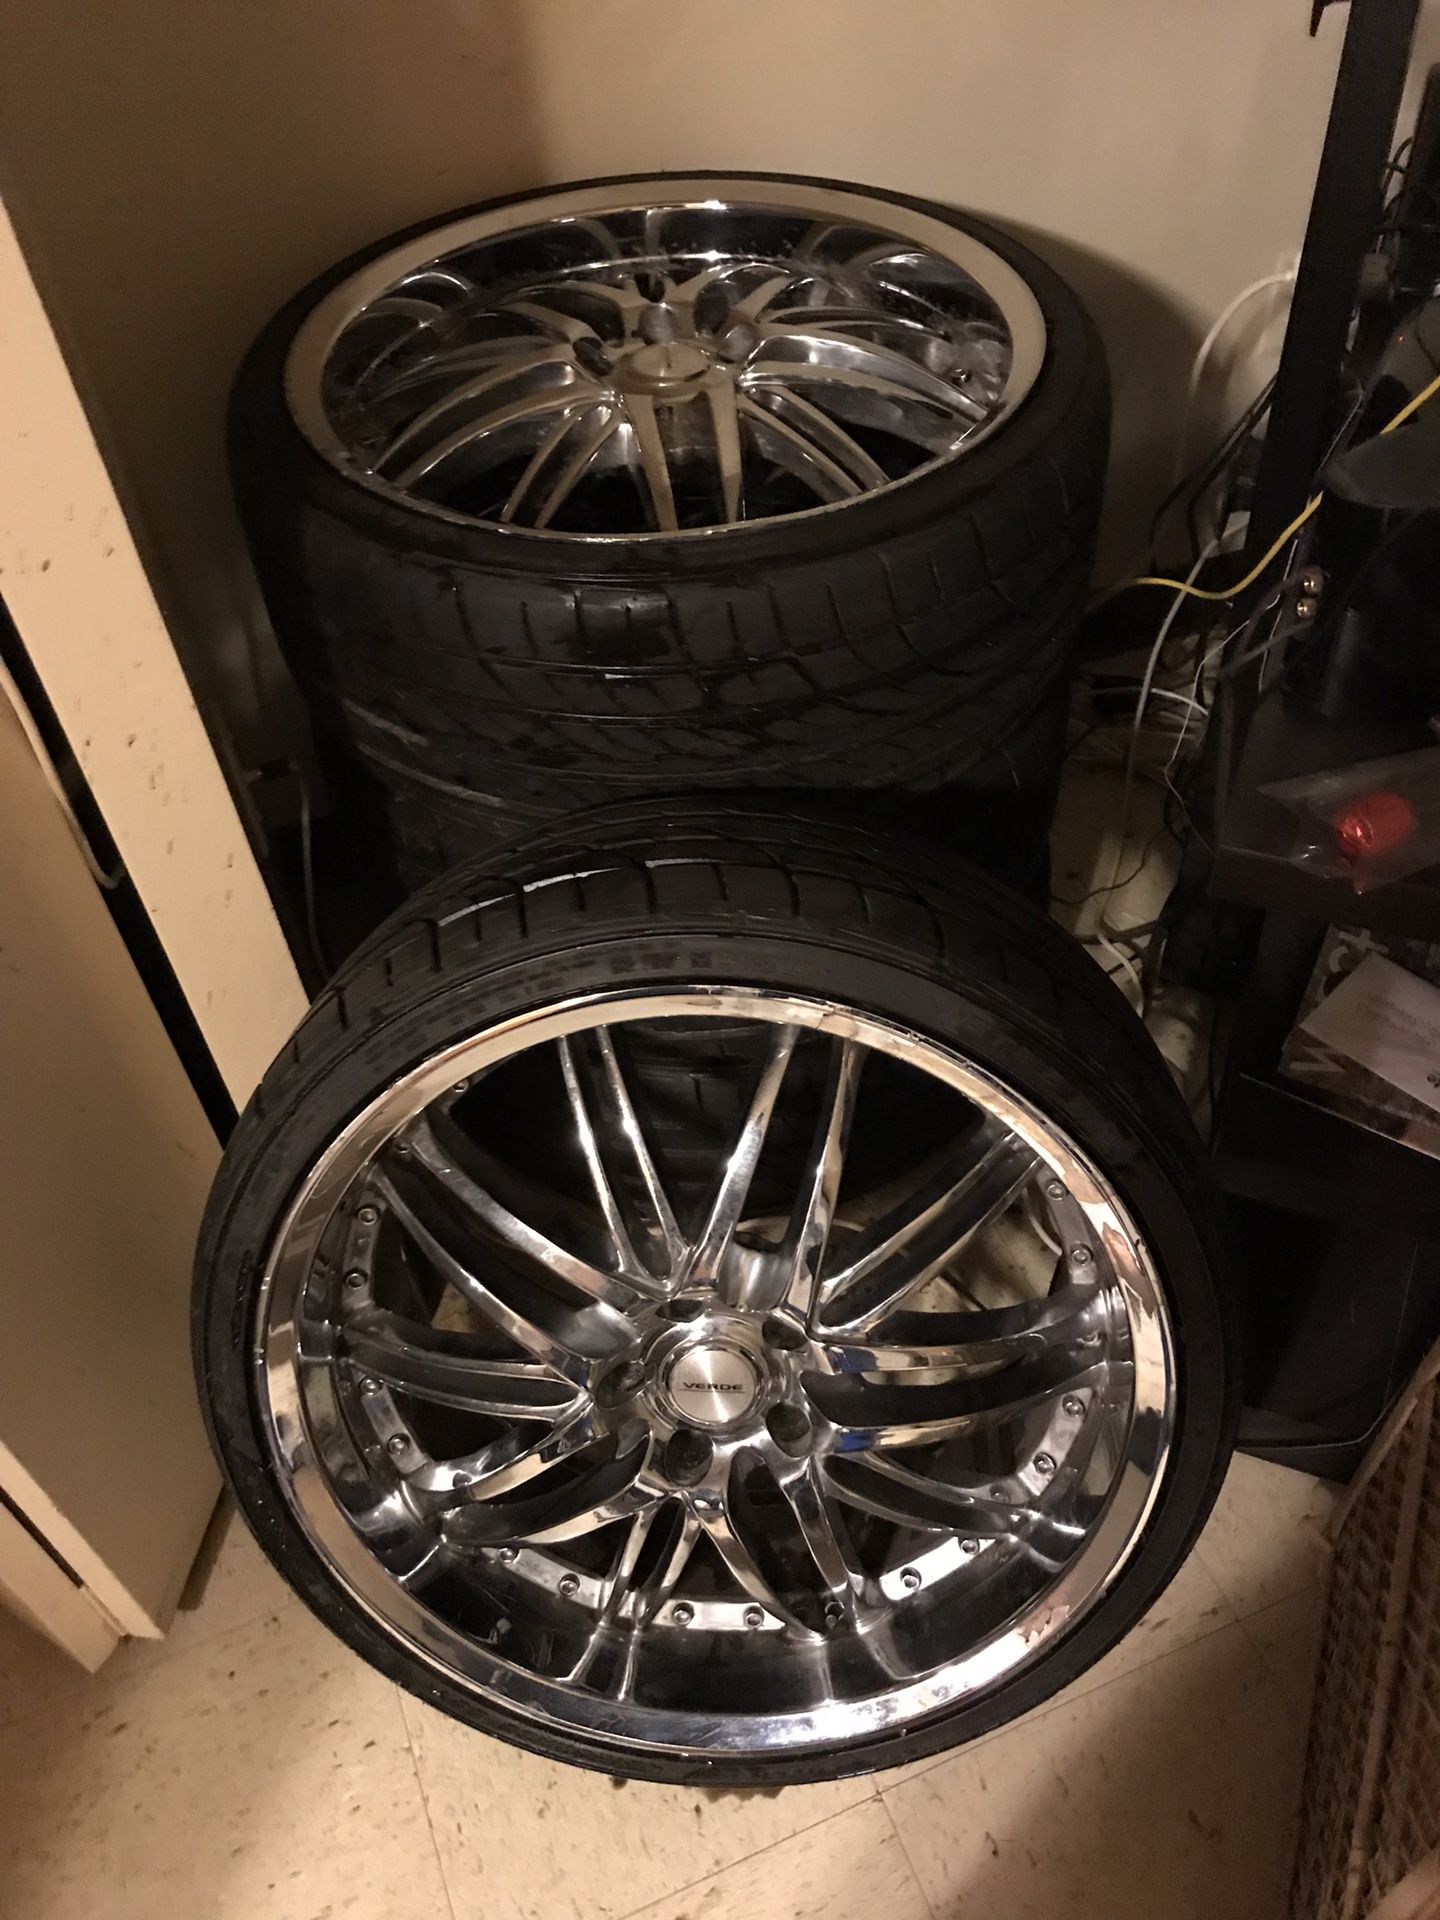 4 used 20 inch verde chrome rims and 4 used low profile tires